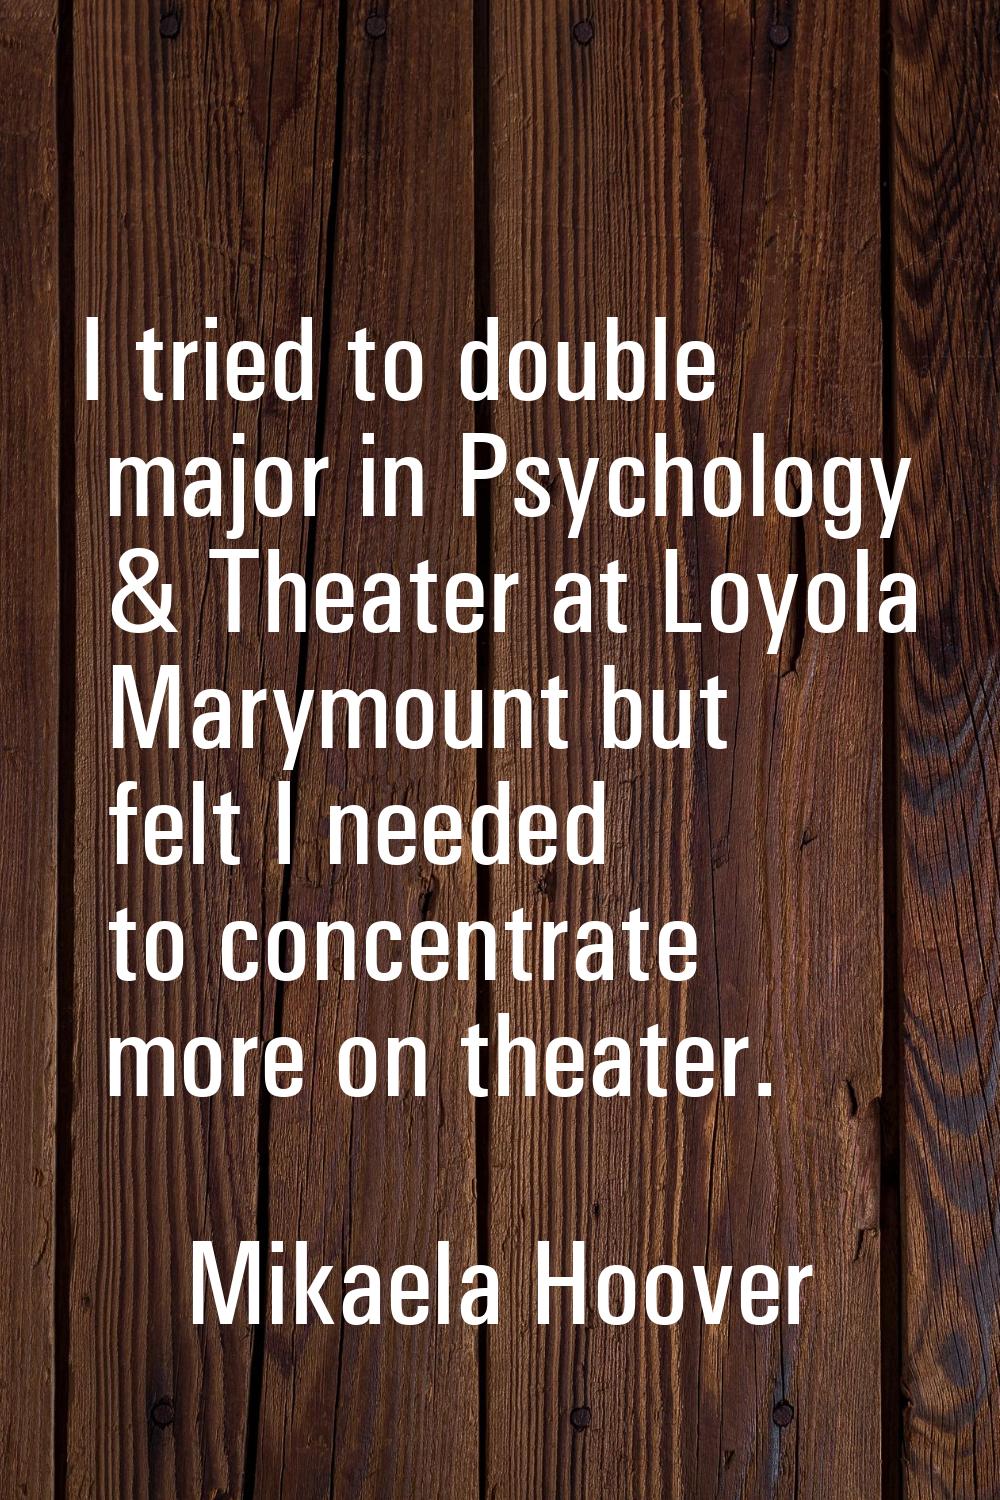 I tried to double major in Psychology & Theater at Loyola Marymount but felt I needed to concentrat